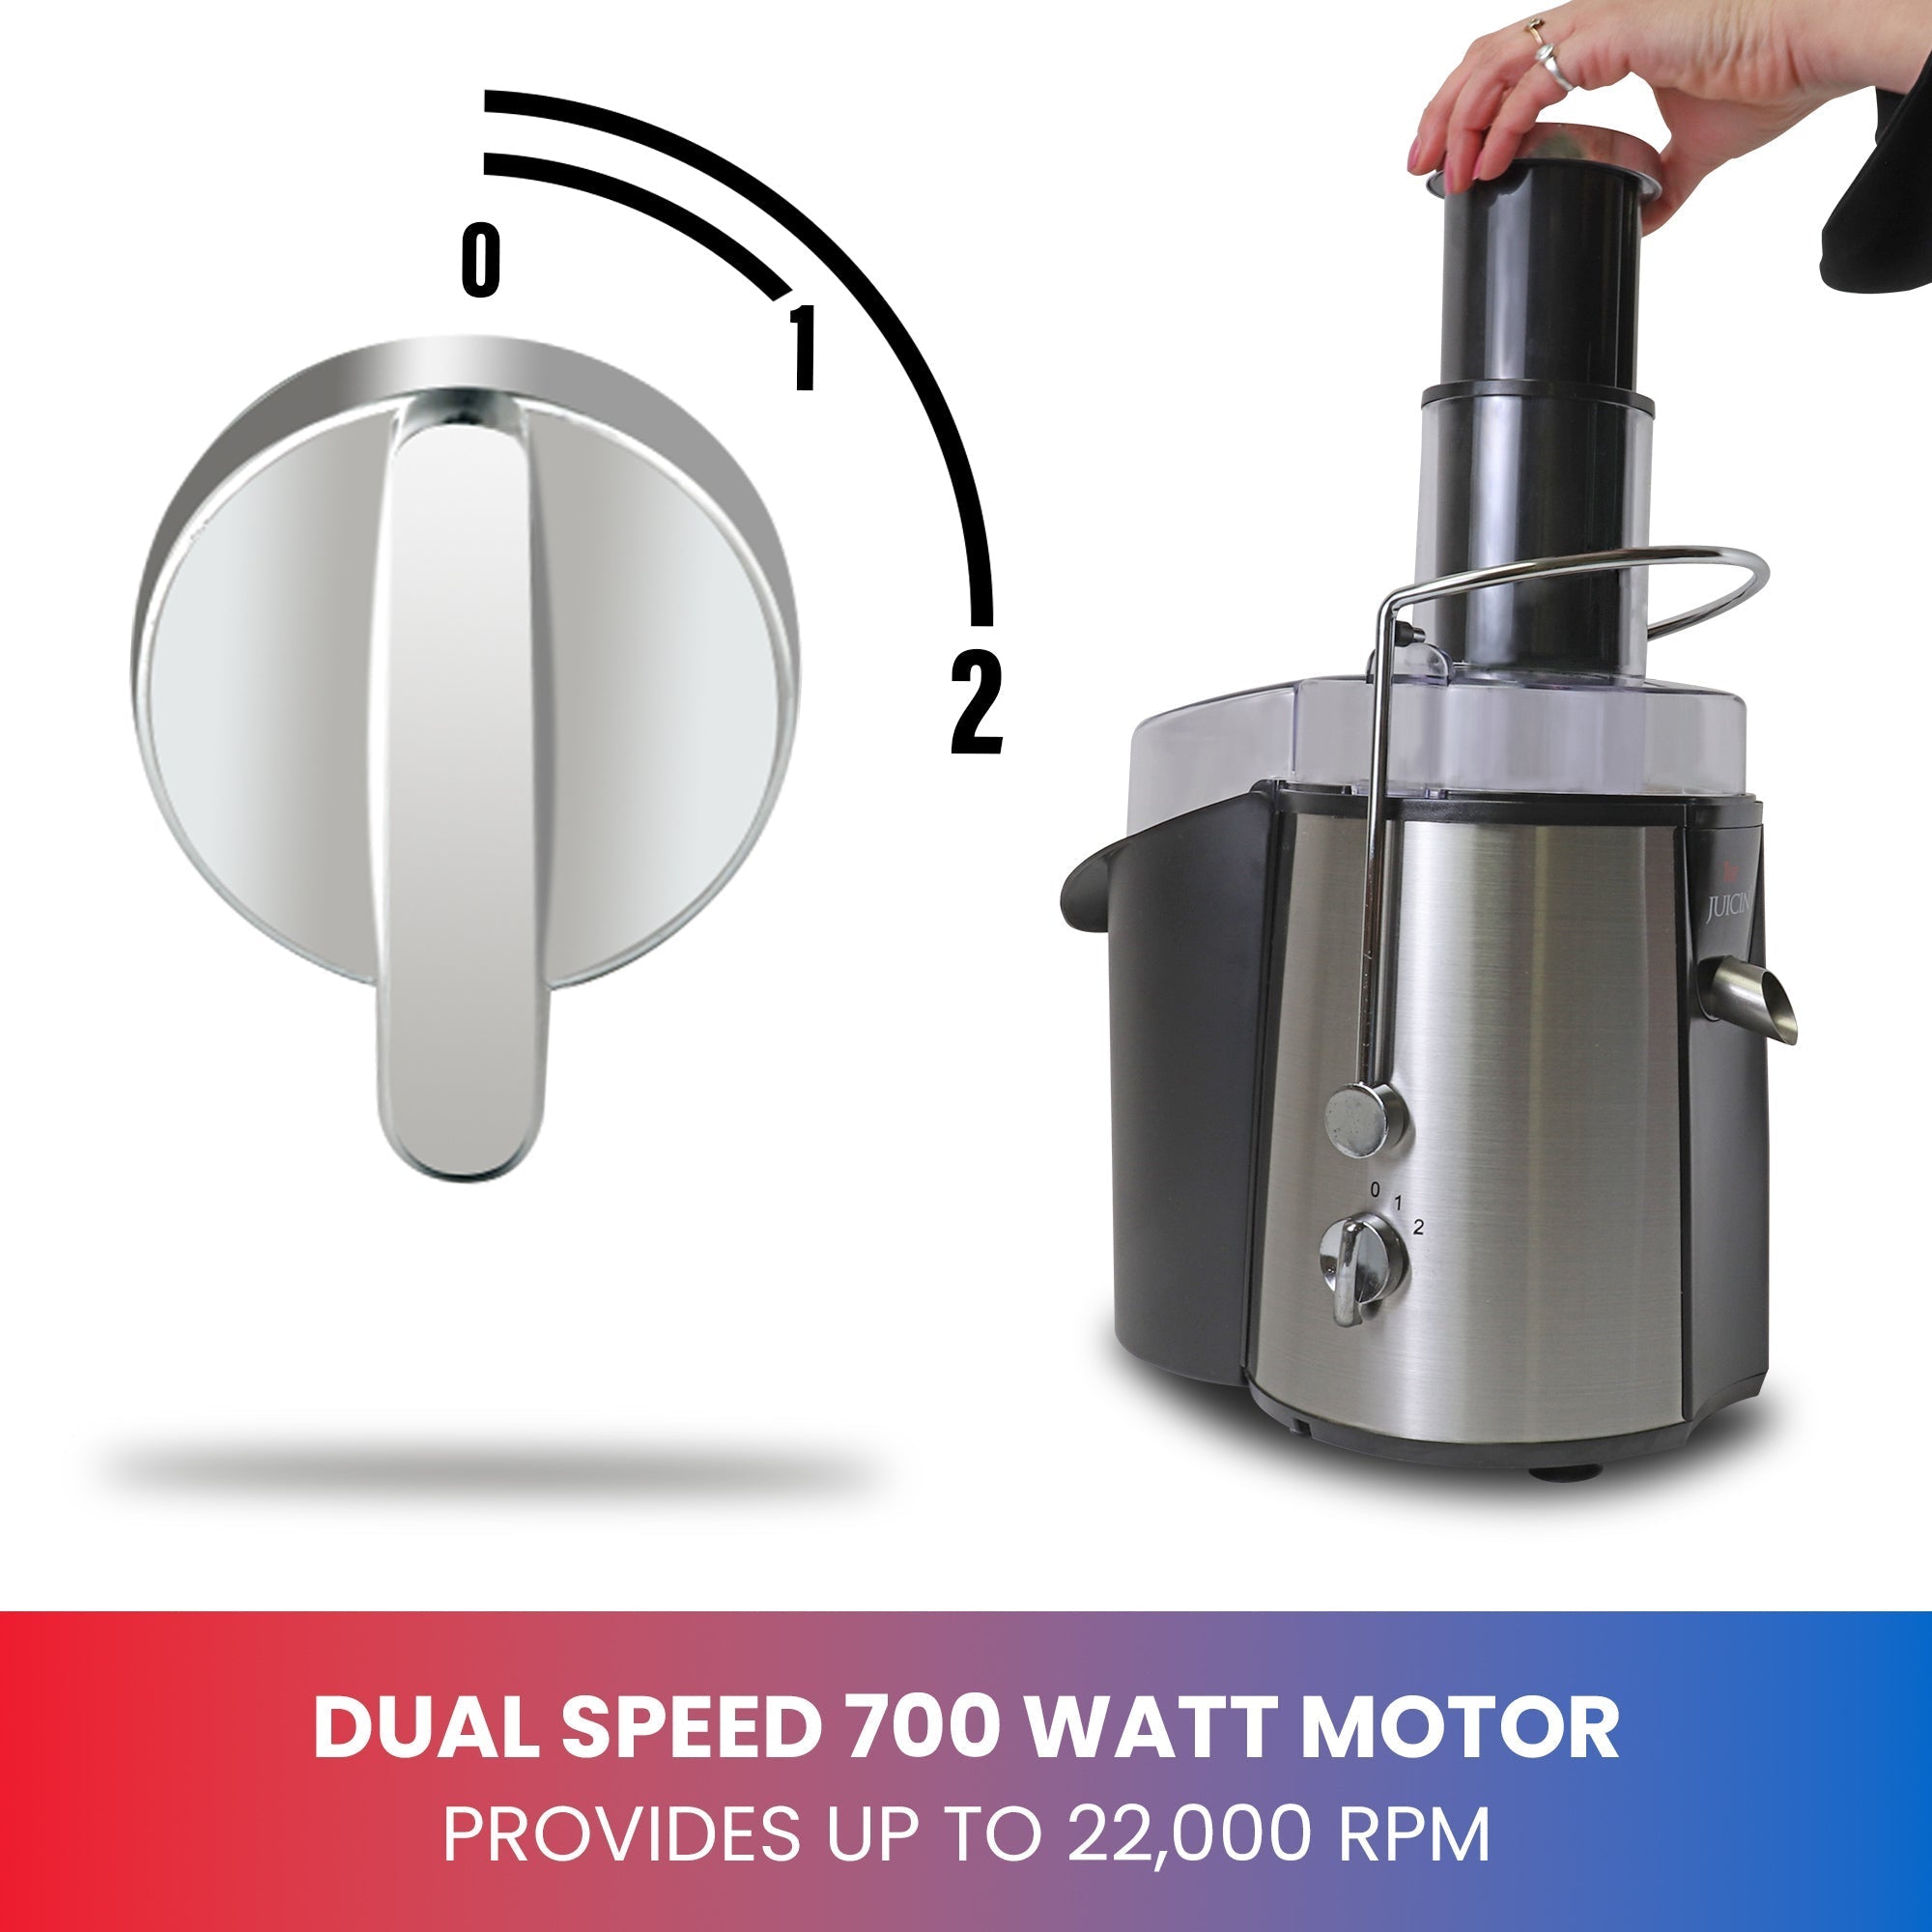 Product shot of juicer with hand pushing down plunger and closeup image of speed control dial. Text below reads "Dual speed 700 Watt motor provides up to 22,000 RPM"